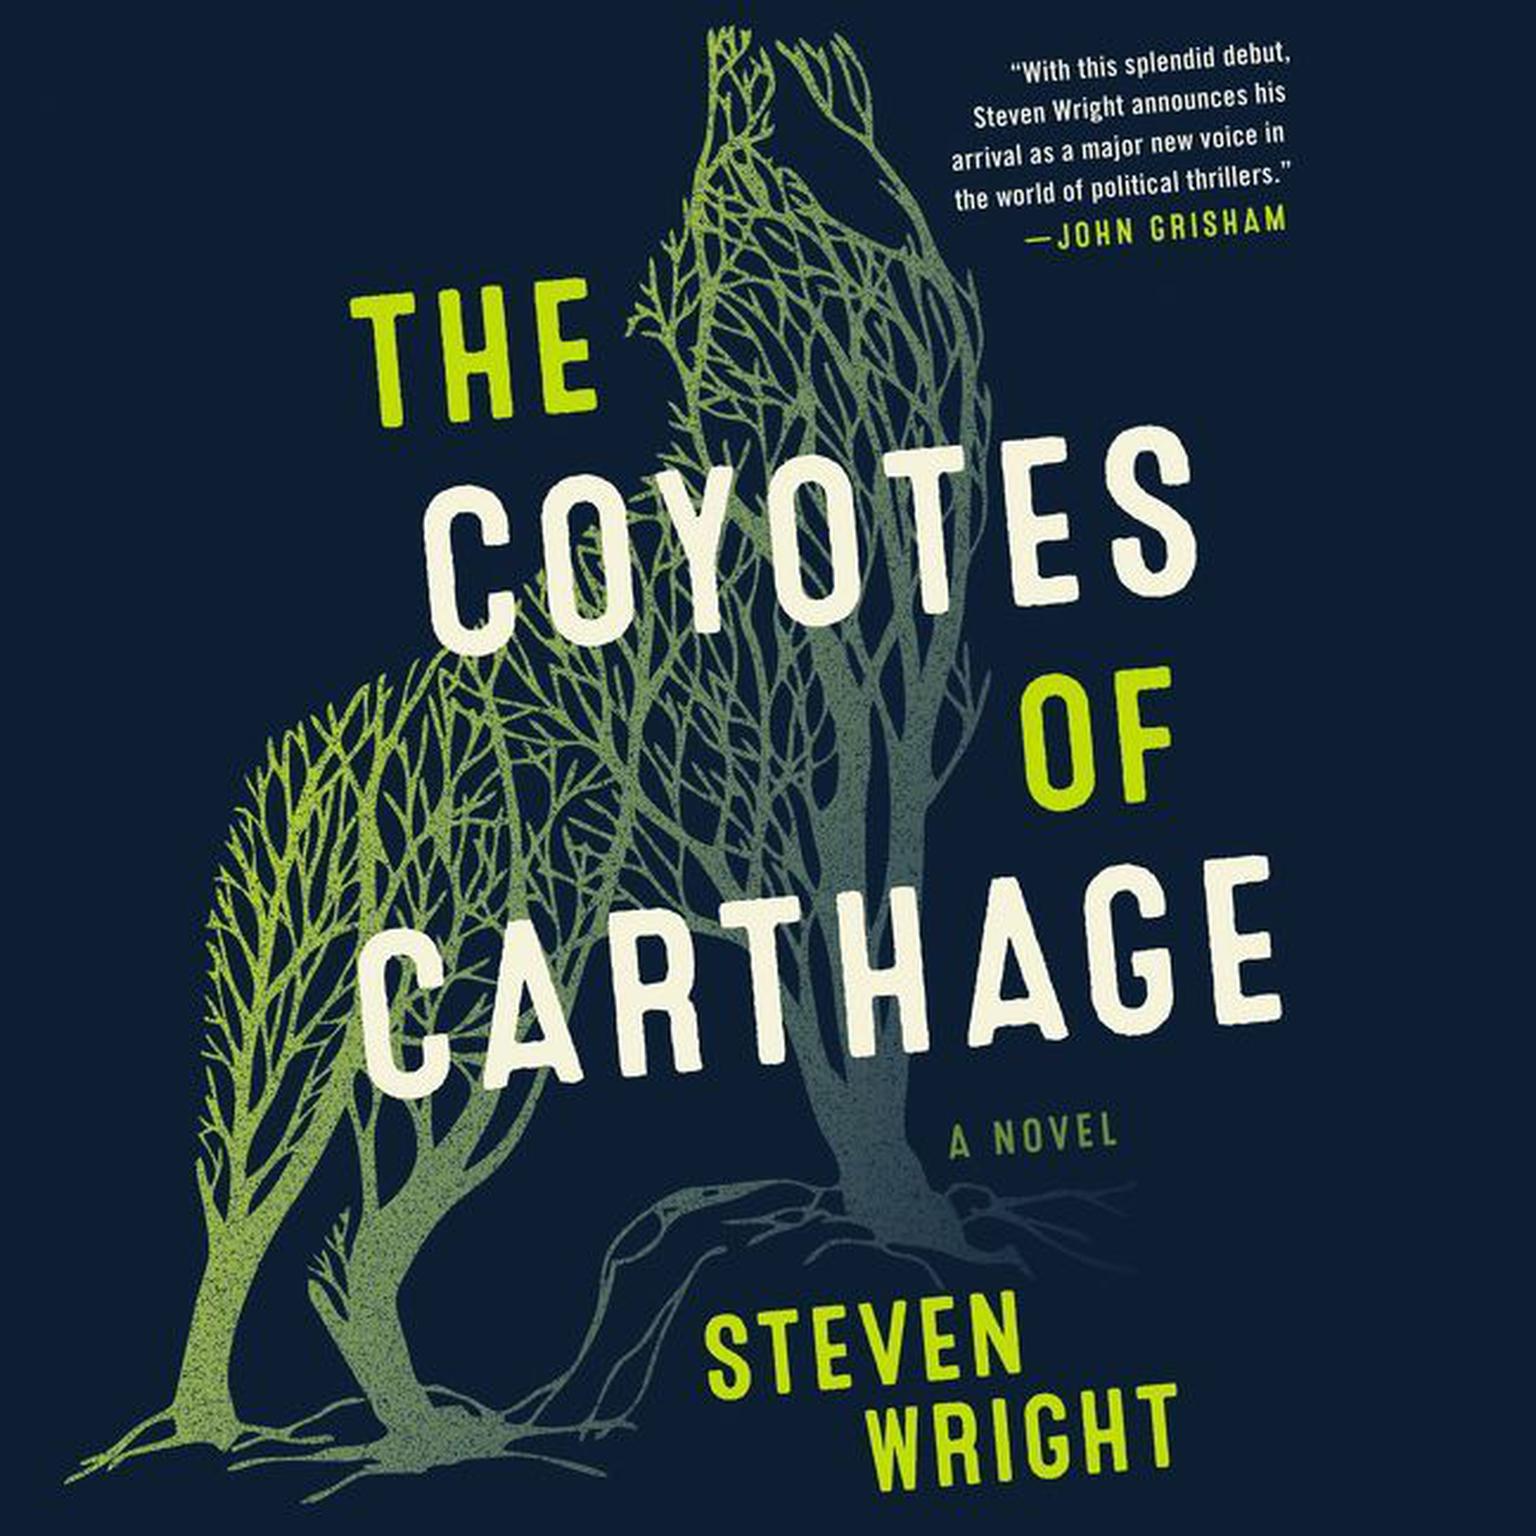 The Coyotes of Carthage: A Novel Audiobook, by Steven Wright